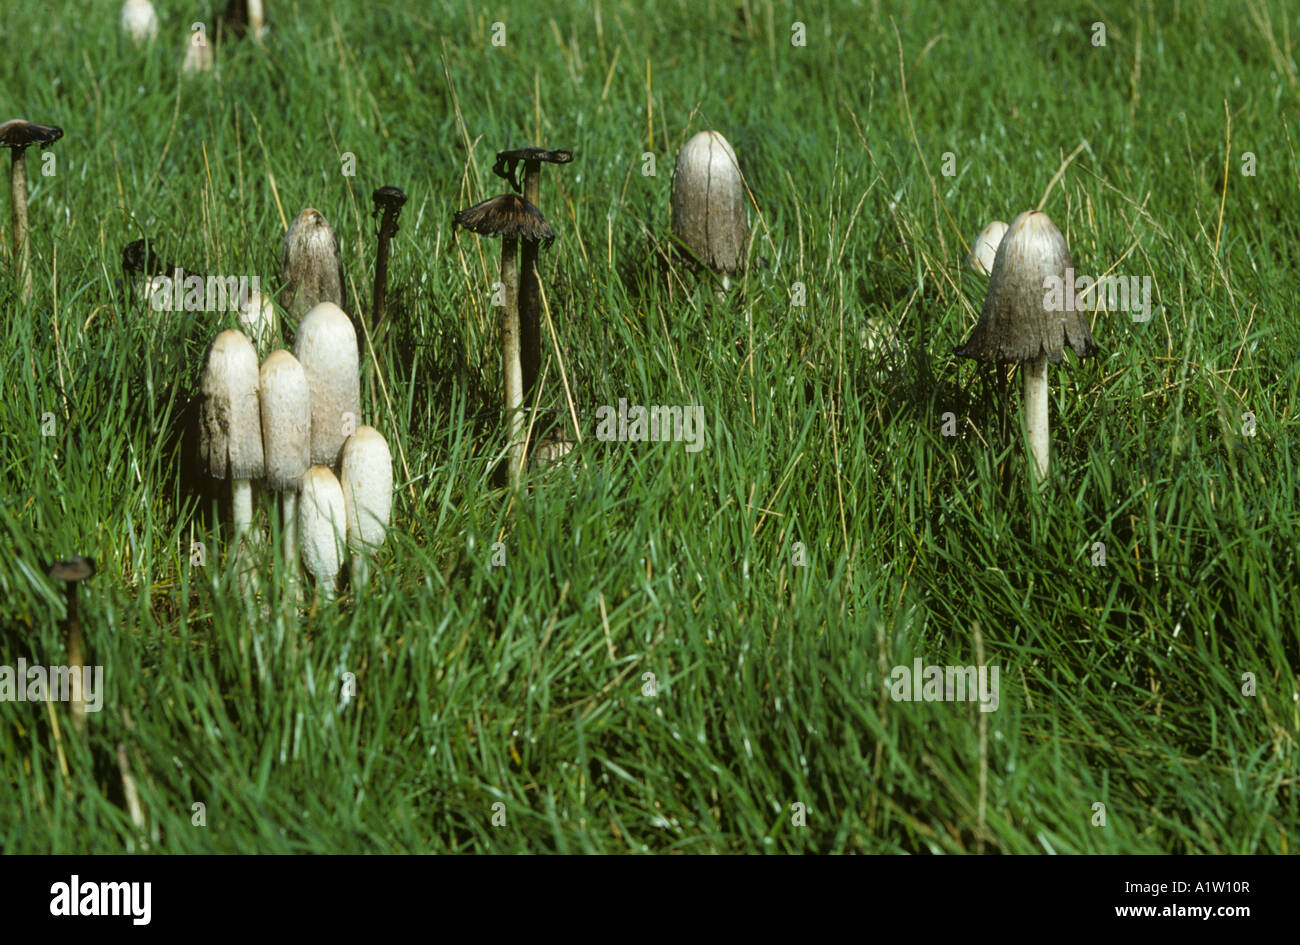 Lawyers wig or shaggy ink cap Coprinus comatus all fruiting stages in a grass ley Stock Photo